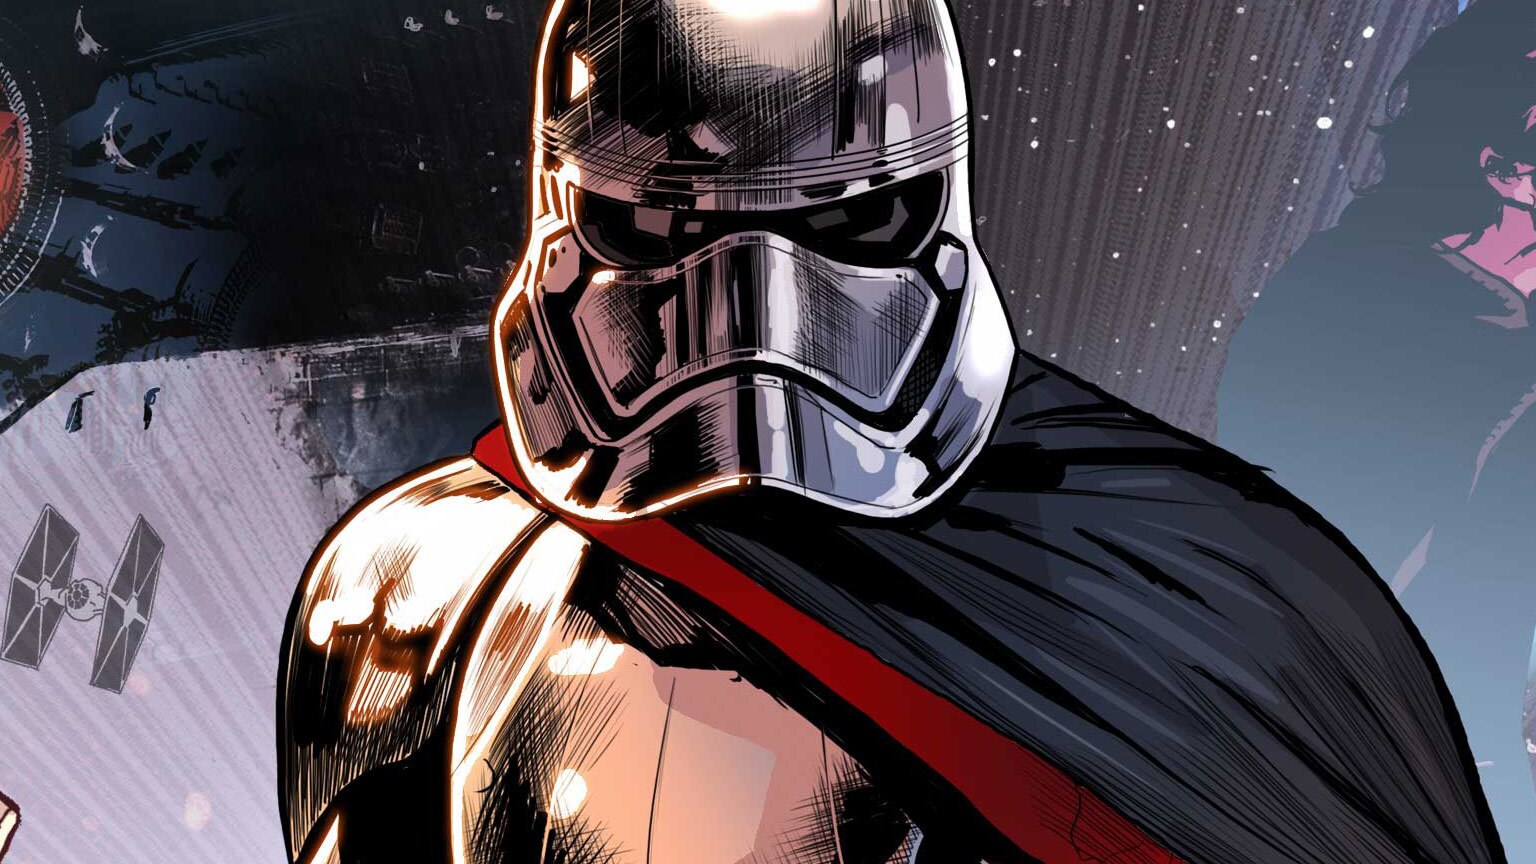 SWCO 2017: Marvel Reveals Captain Phasma Miniseries Bridging The Force Awakens and The Last Jedi - Exclusive